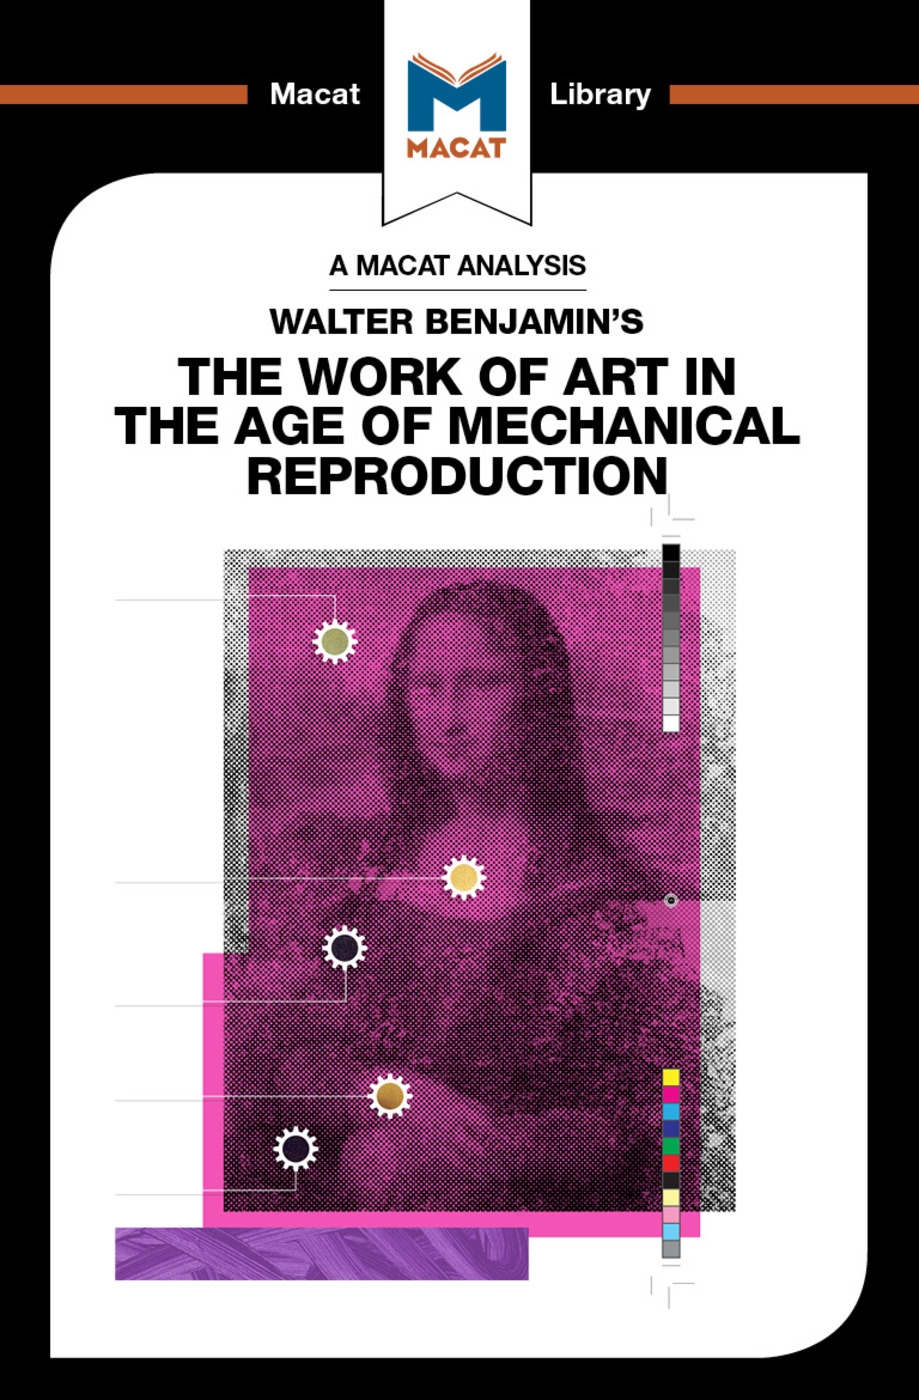 Walter Benjamin’s the Work of Art in the Age of Mechanical Reproduction